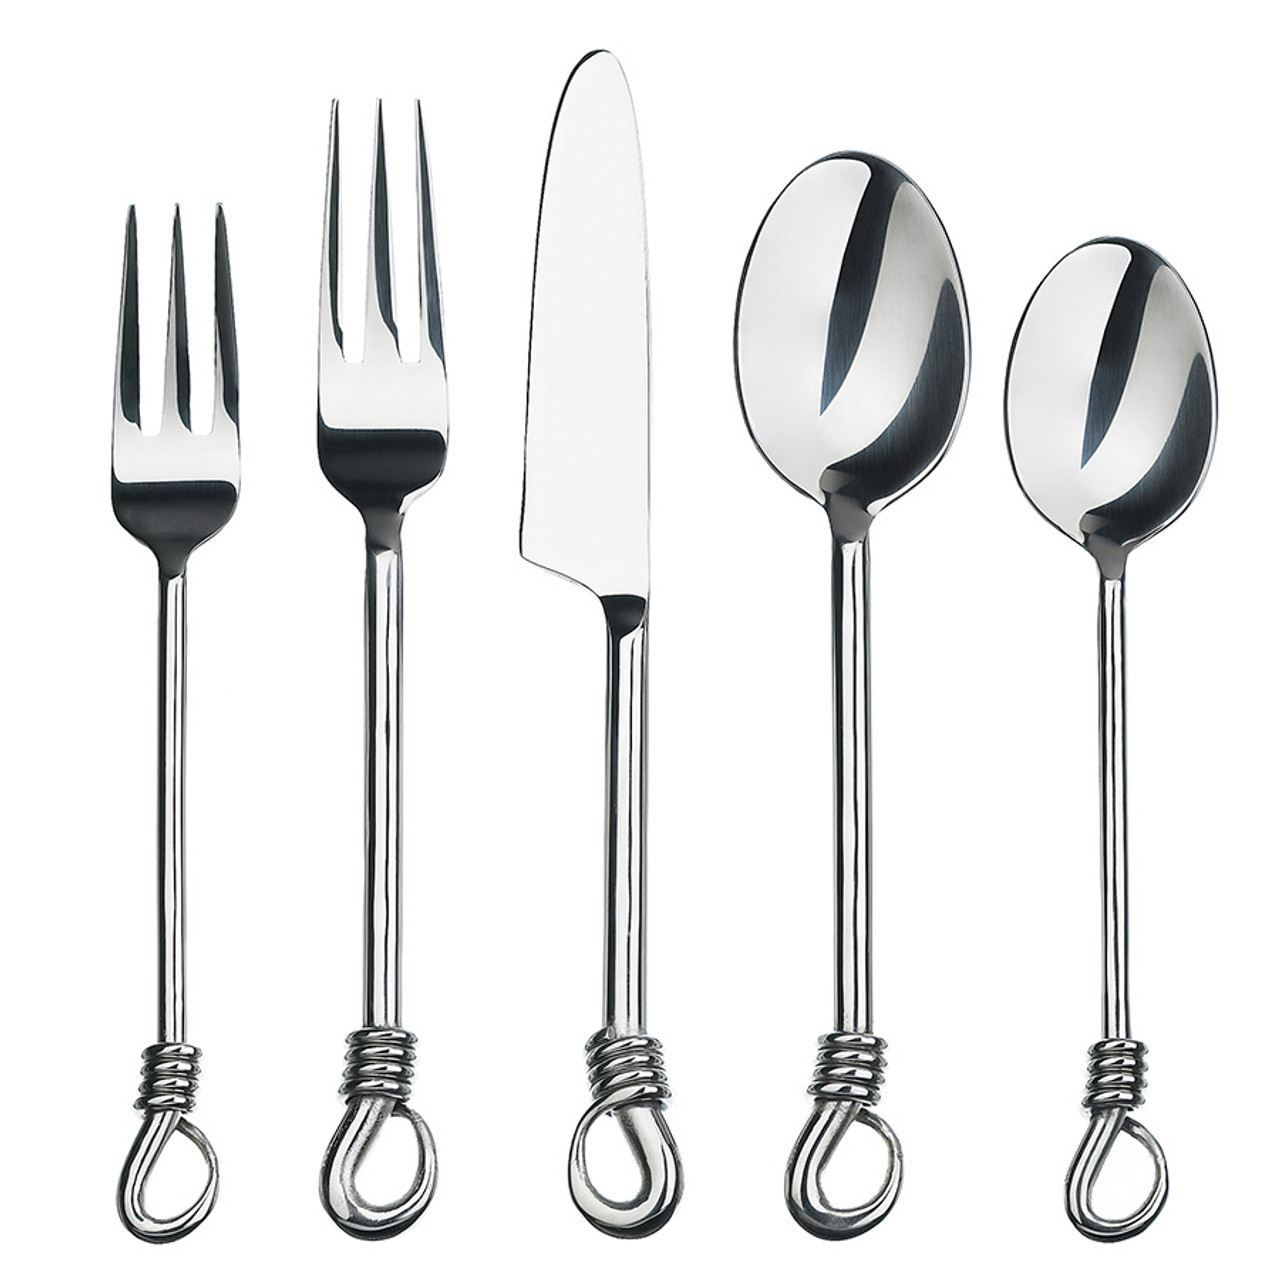 Deluxe Weighted Utensils - Set of 4 - FREE Shipping